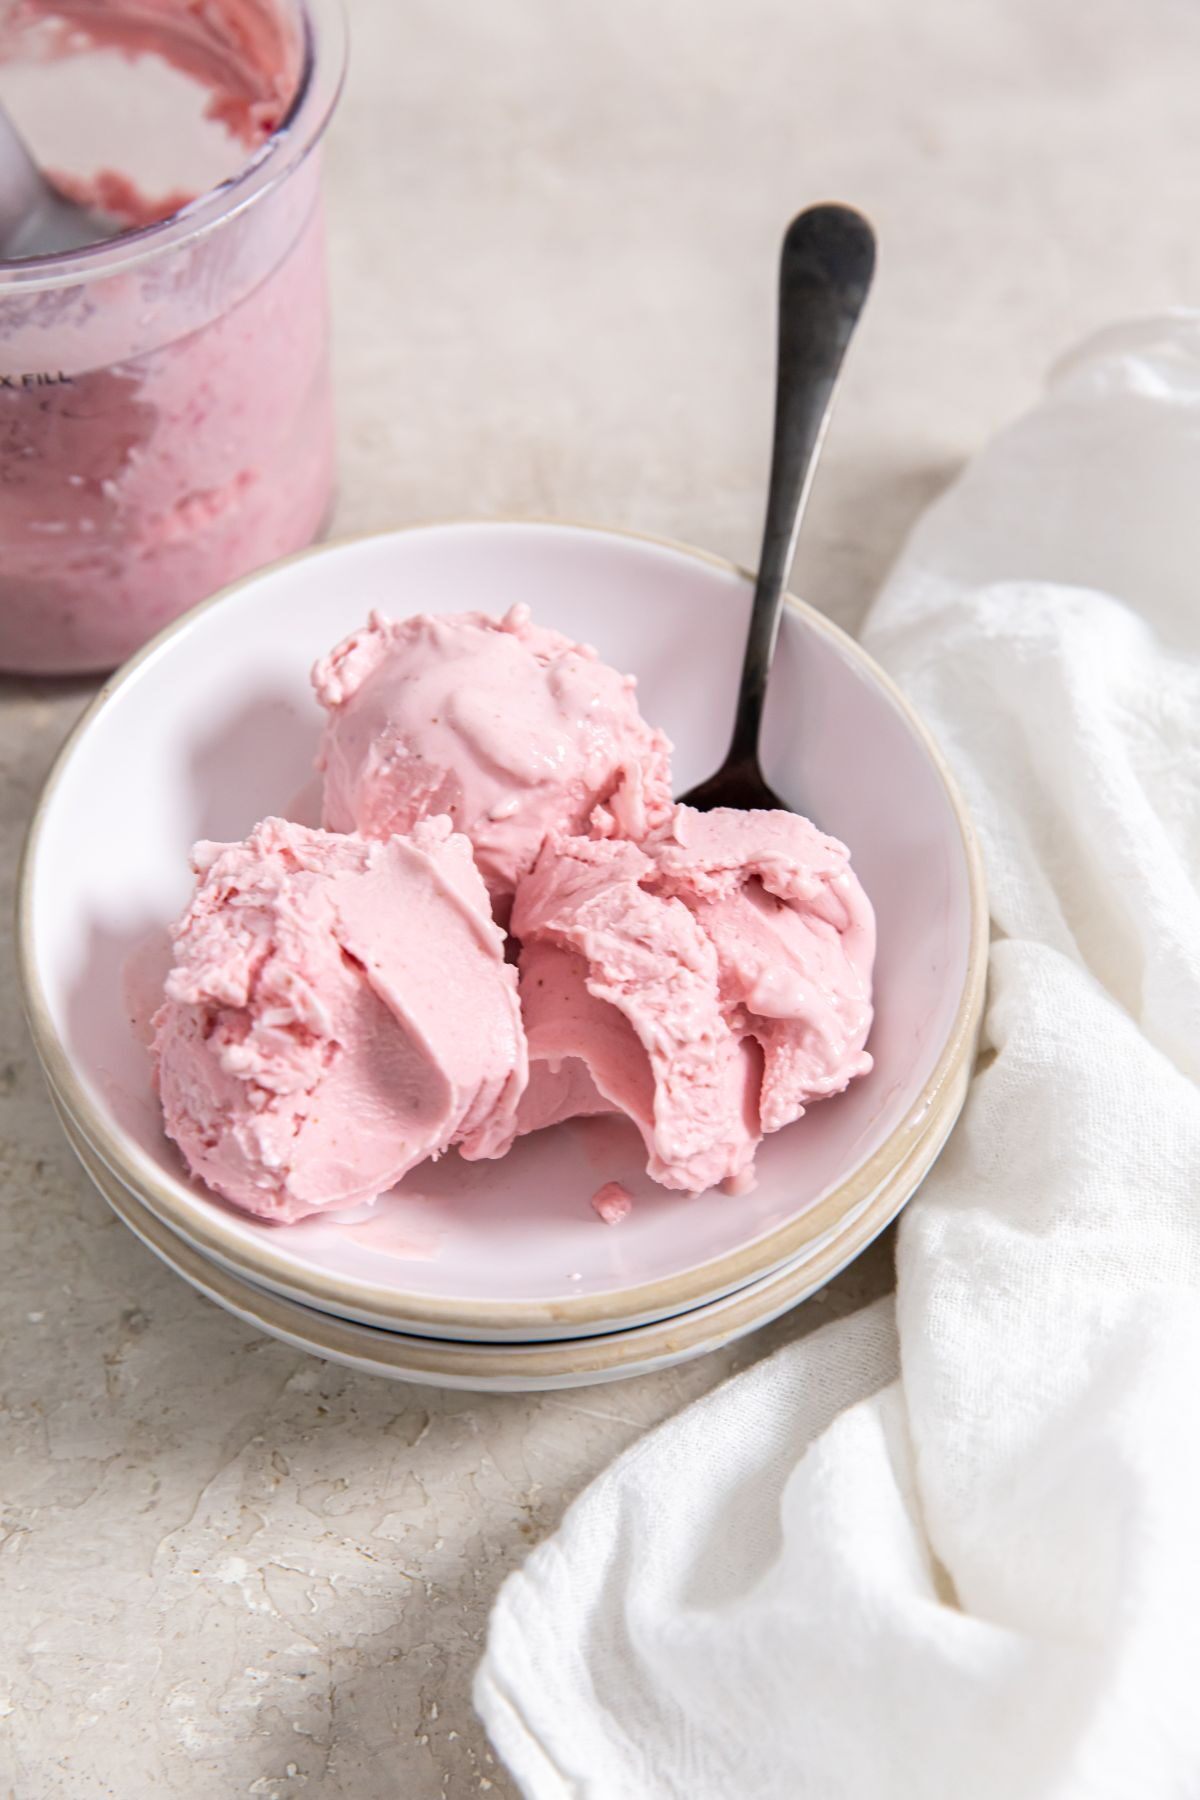 Ninja Creami Strawberry ice cream in a small white bowl with a black spoon